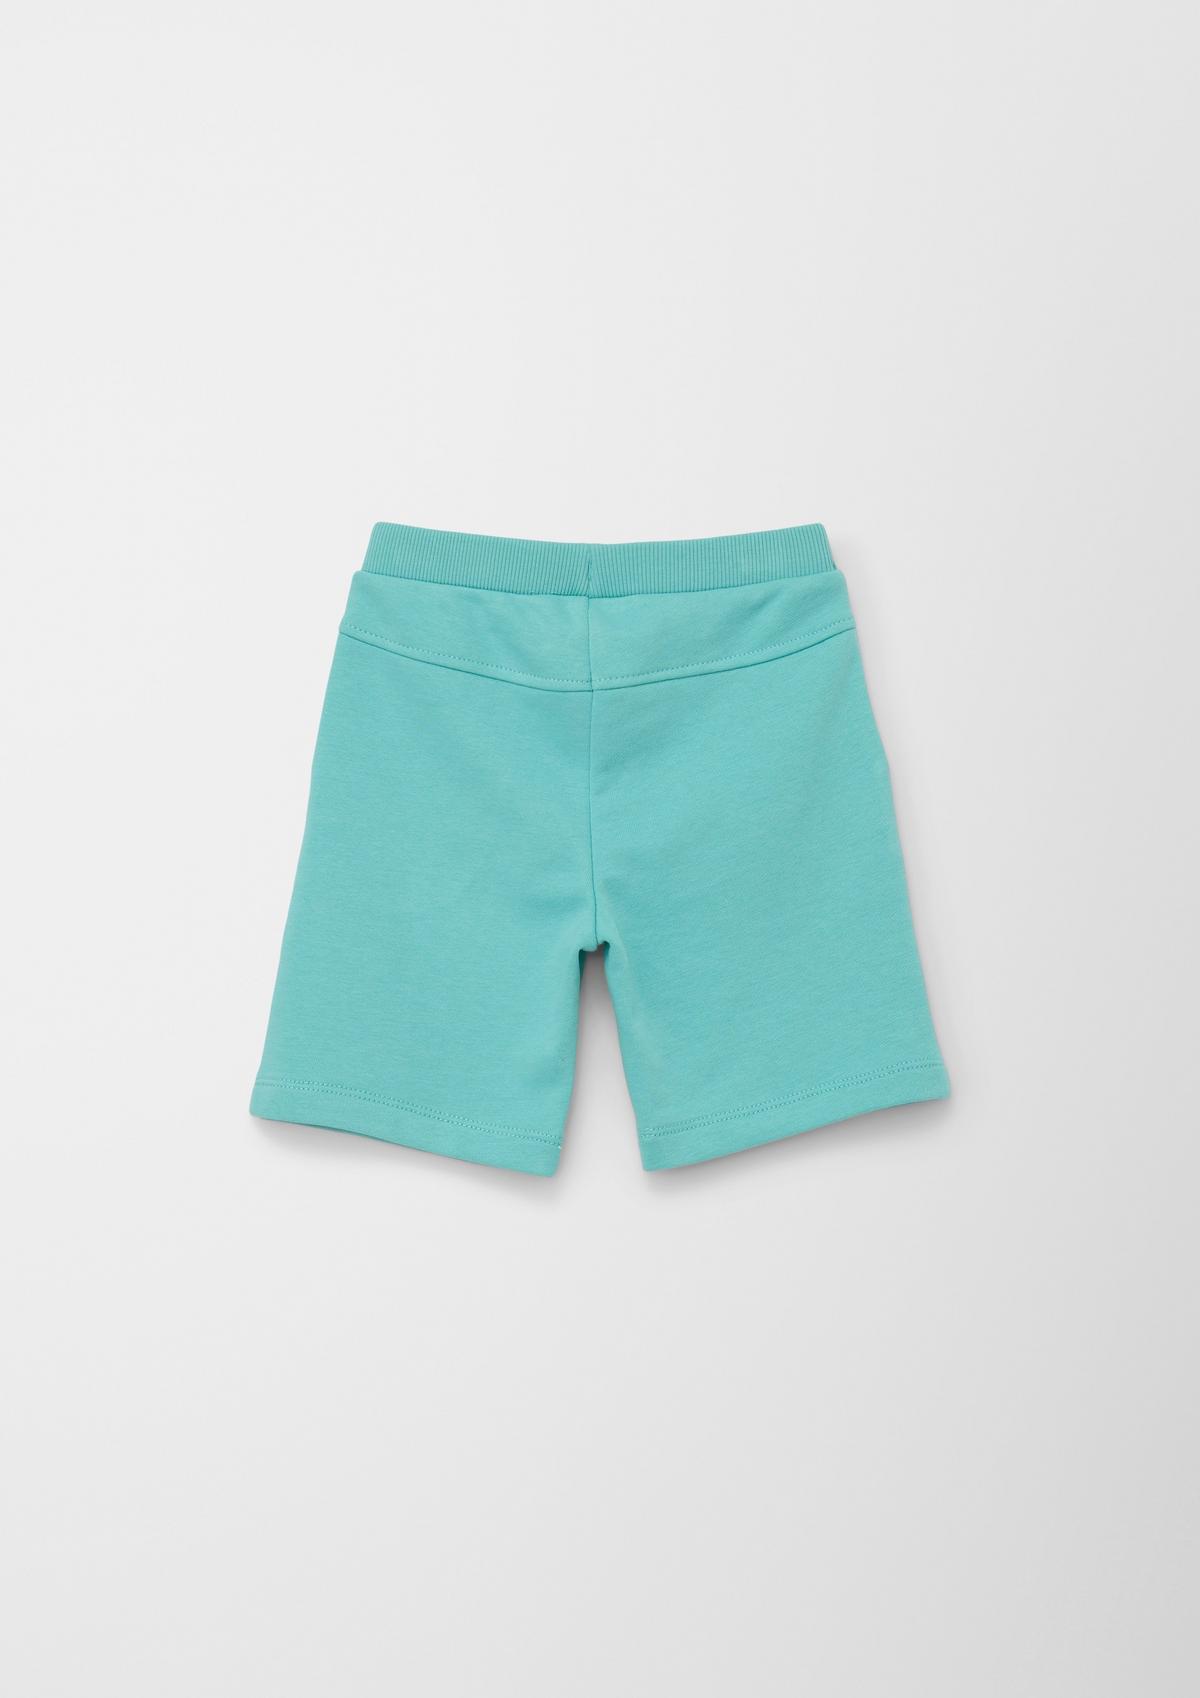 s.Oliver Loose fit: Bermudas made of sweatshirt fabric